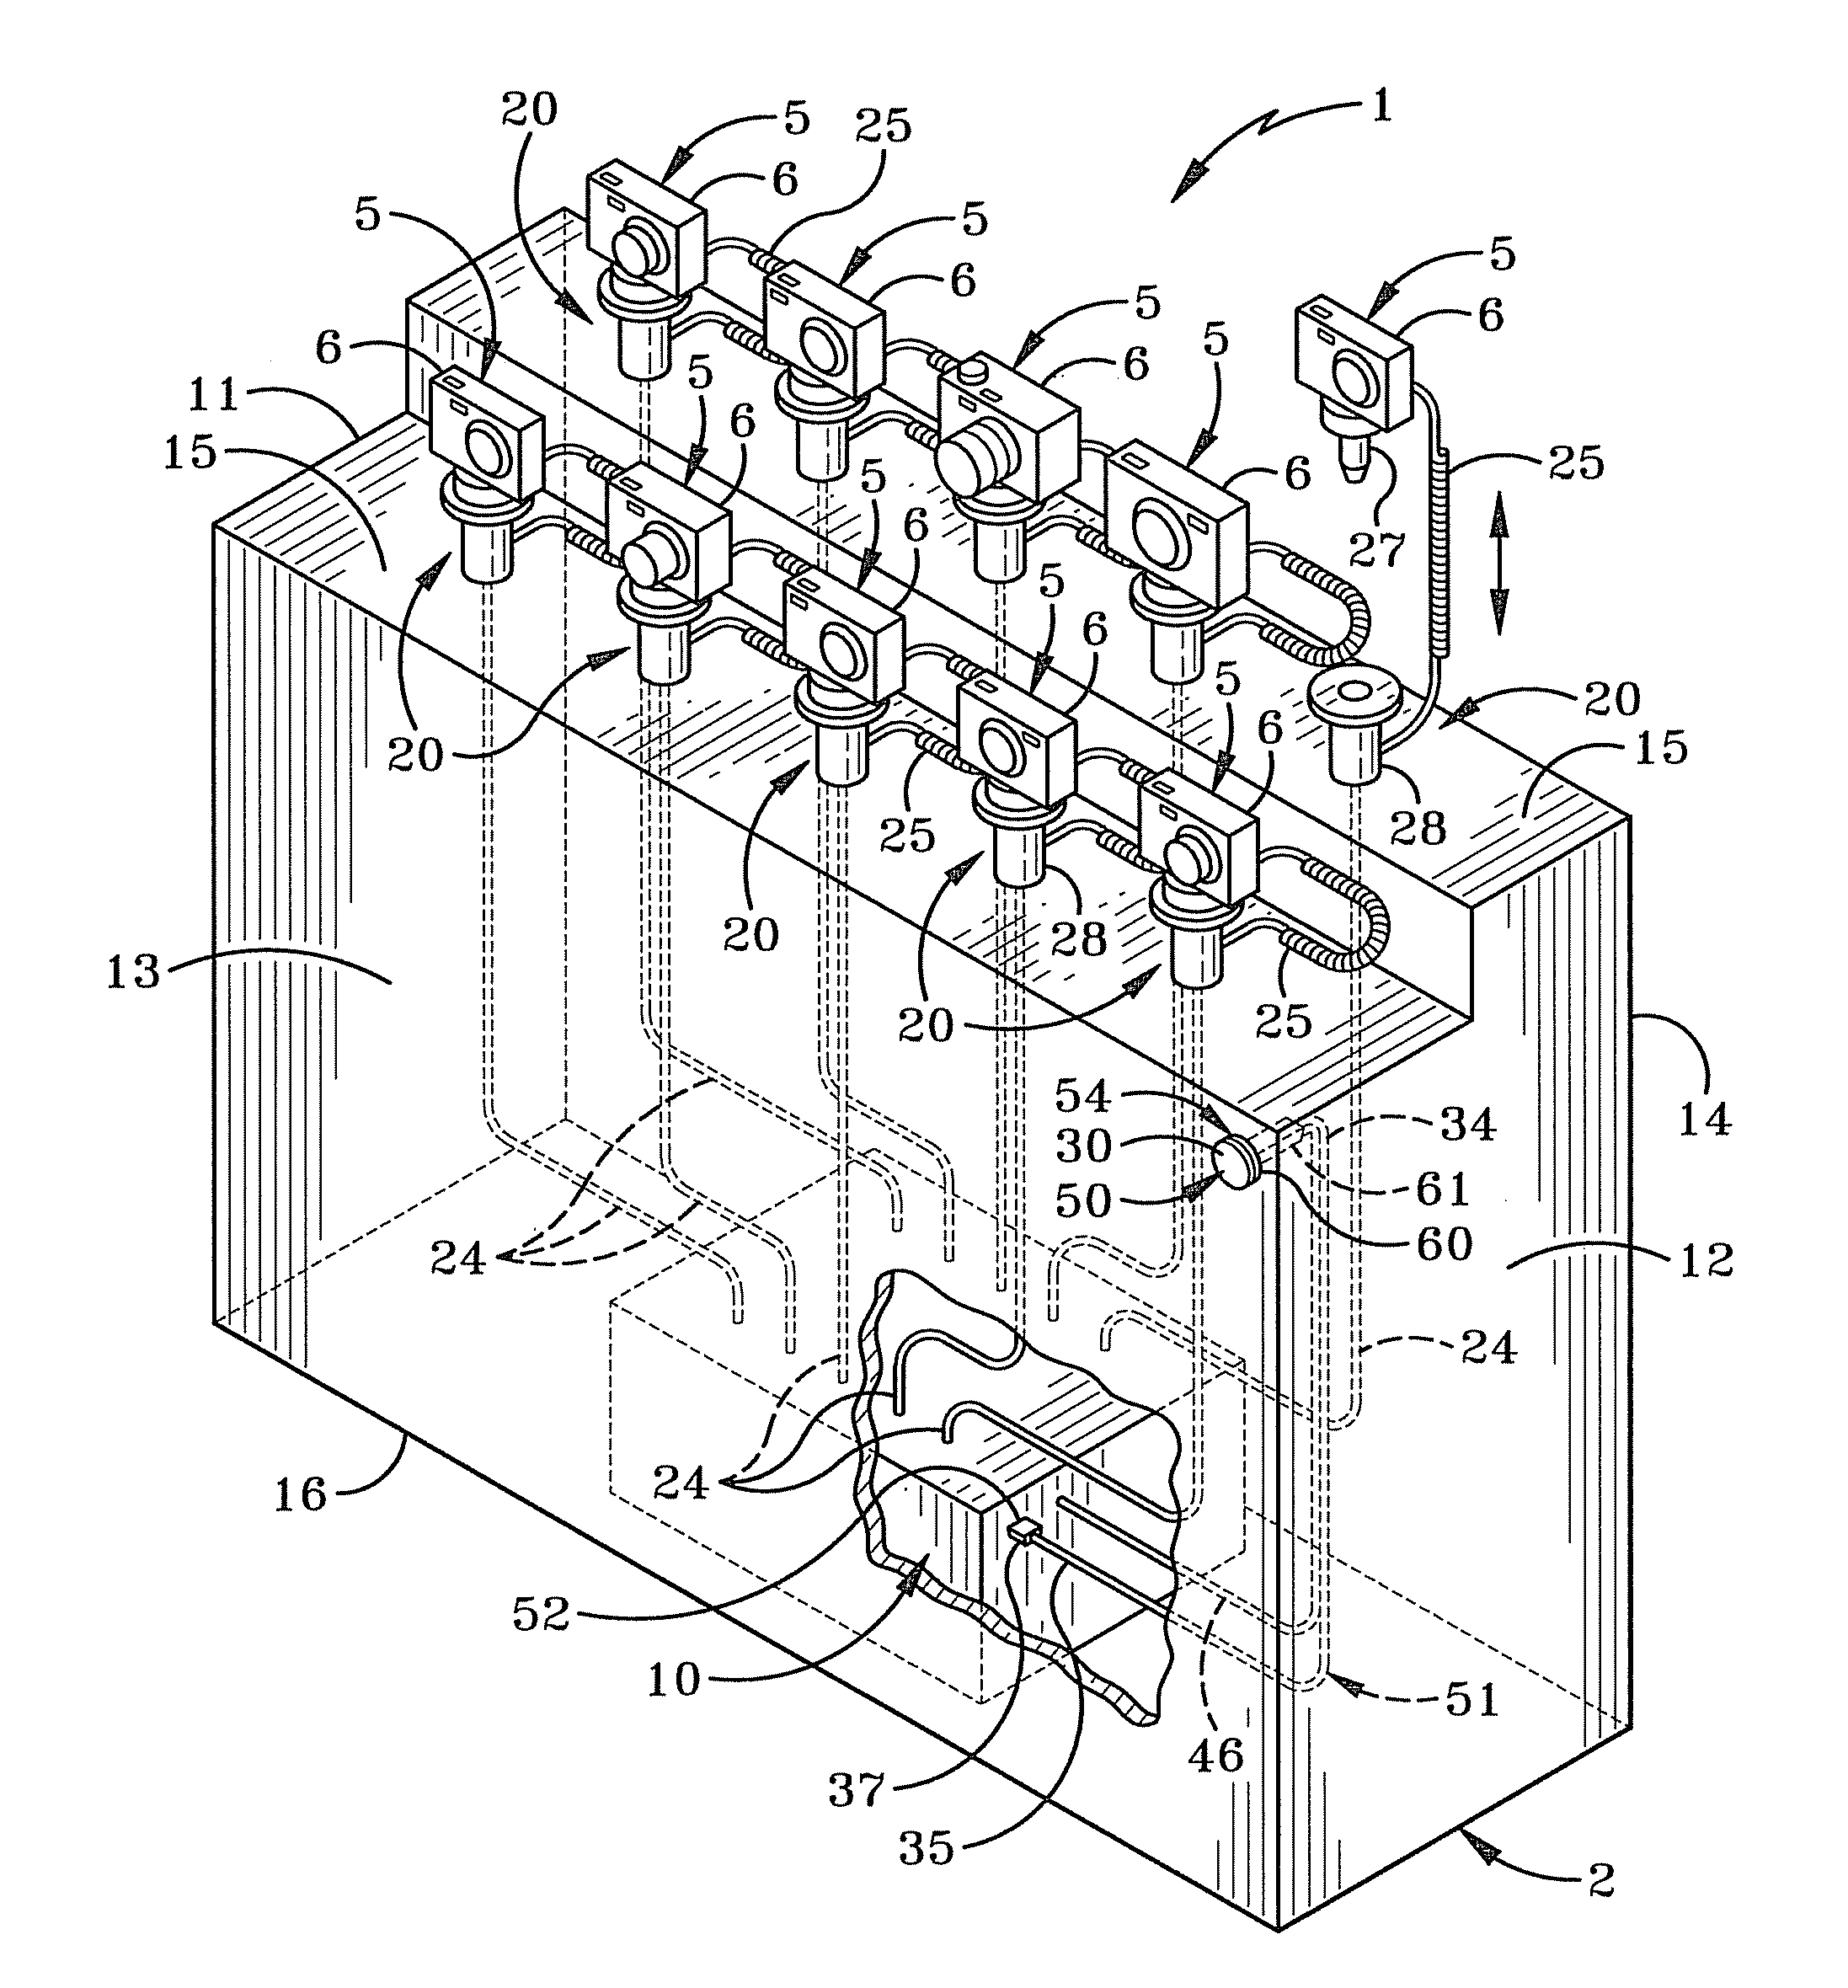 Method and apparatus for deactivating an alarming unit